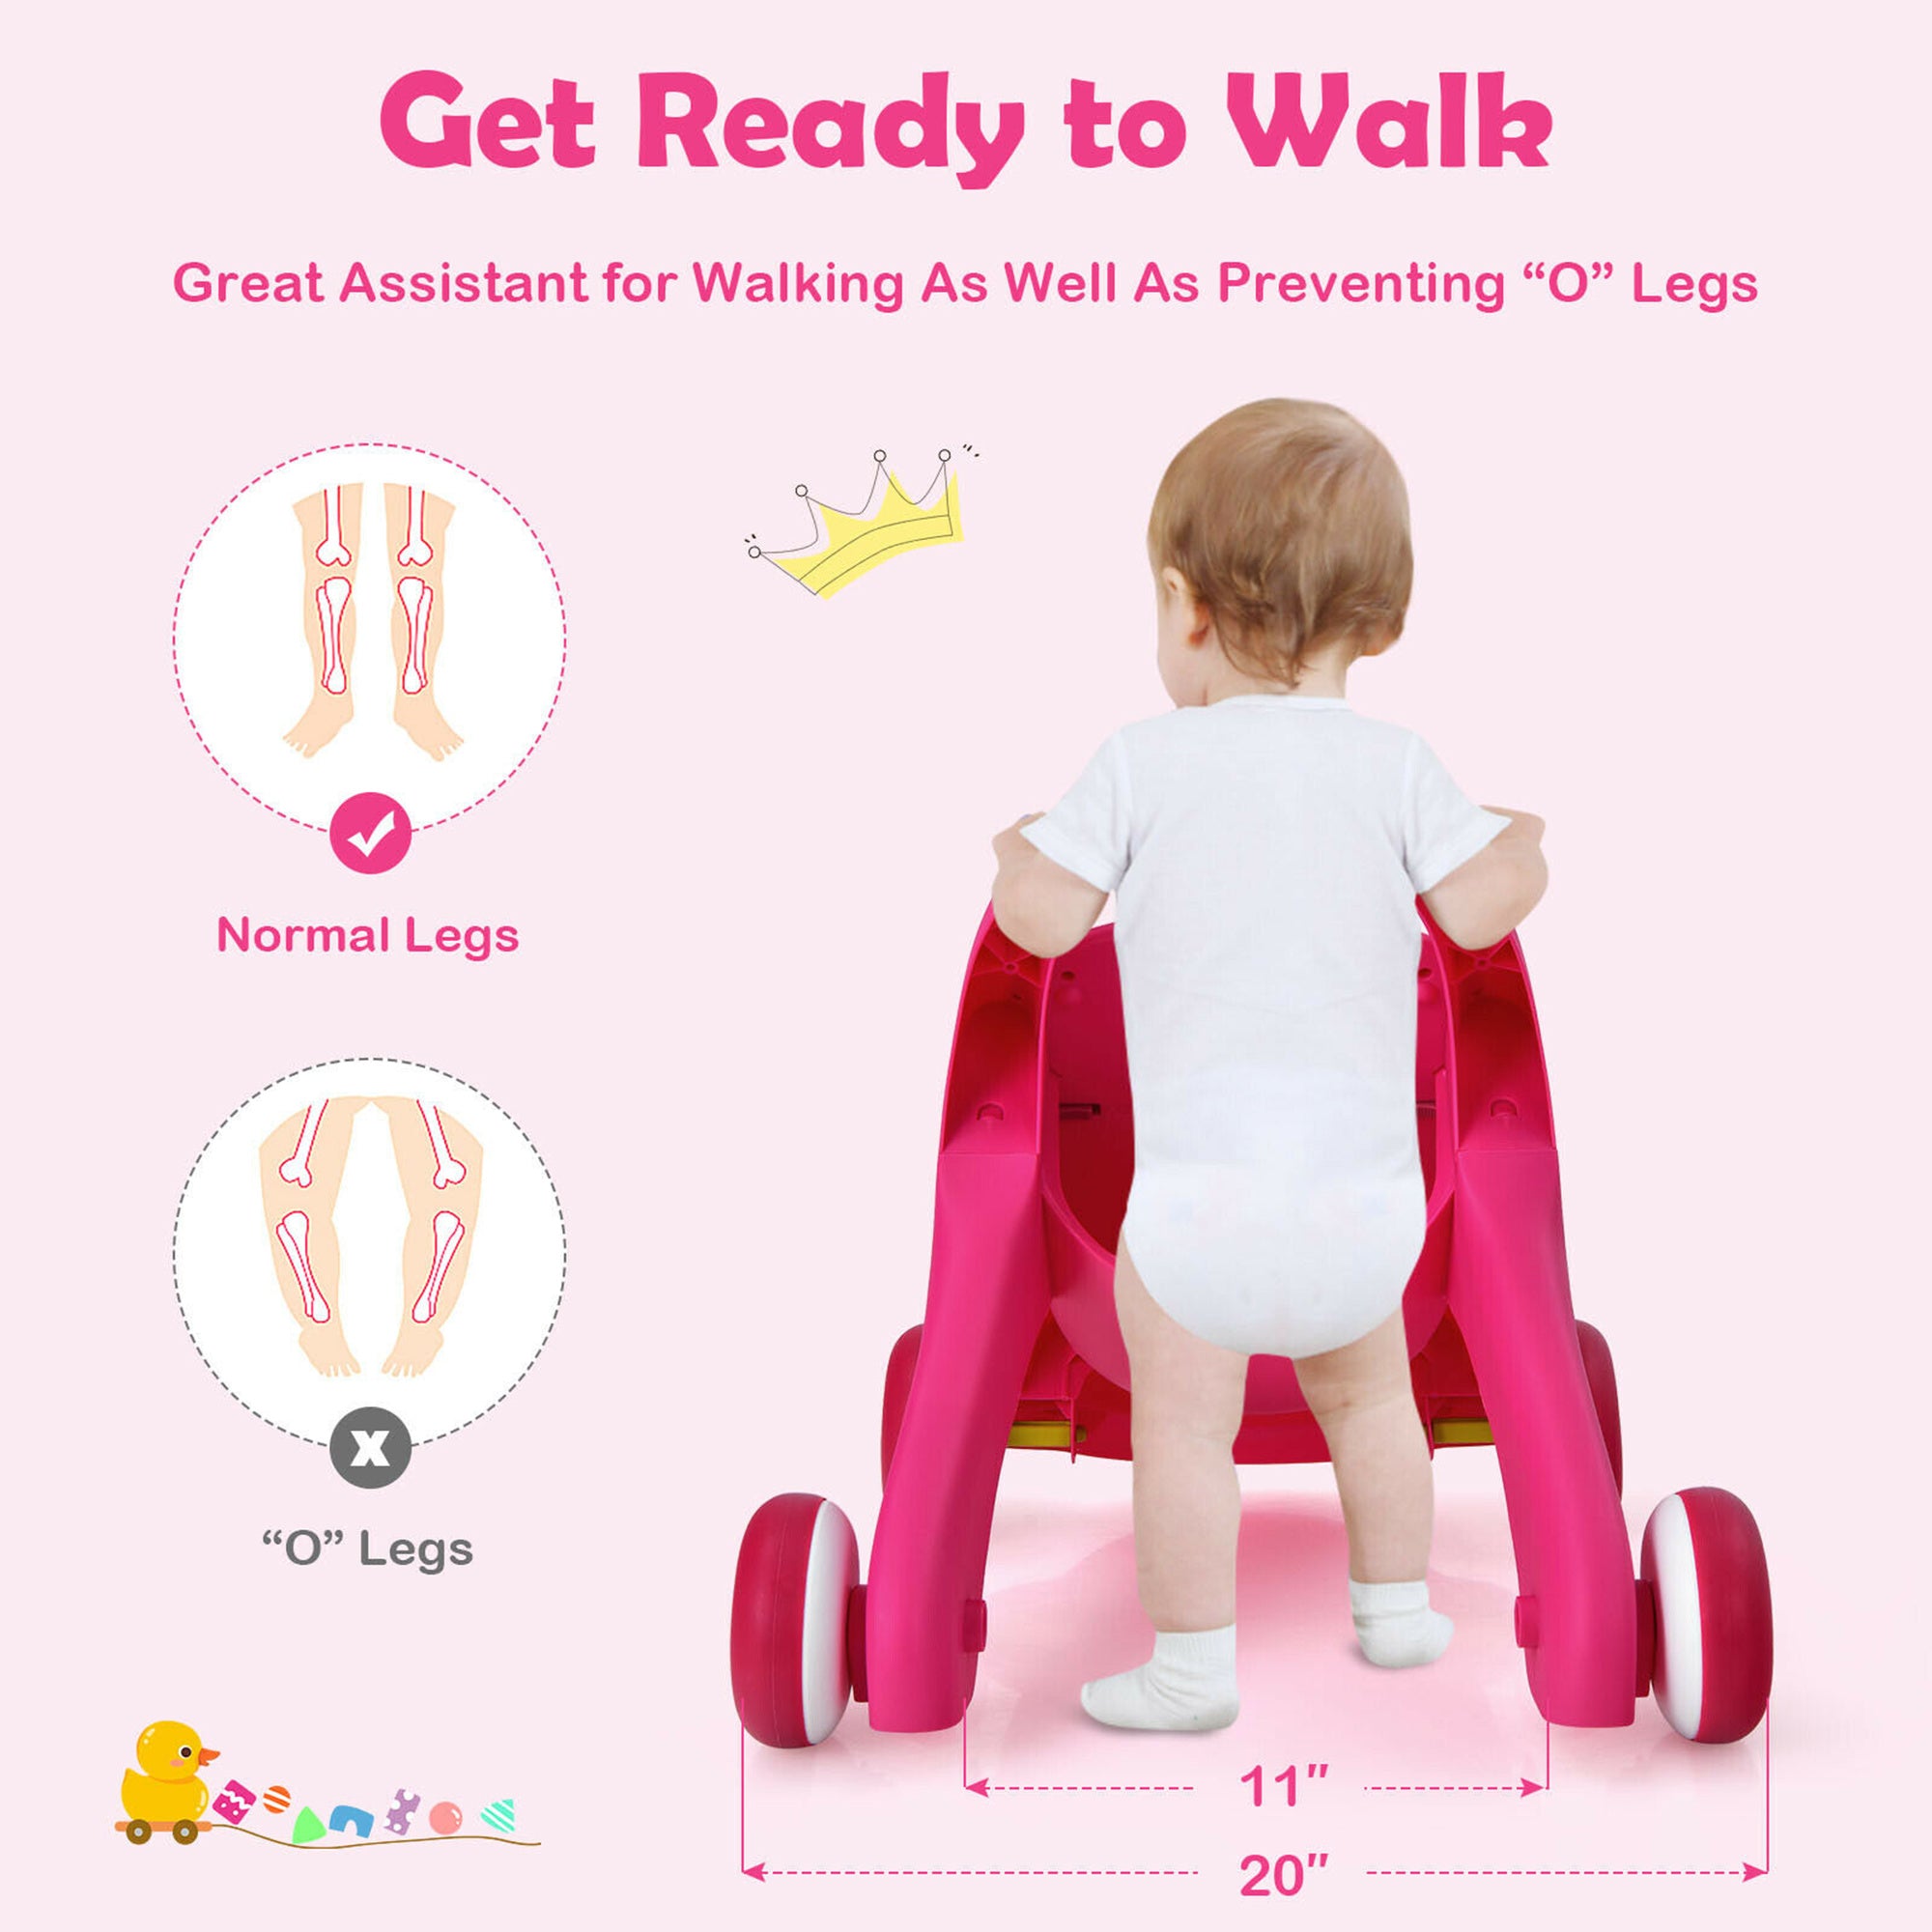 Sit-to-Stand Learning Walker Toddler Push Walking Toy w/Lights & Sounds Pink